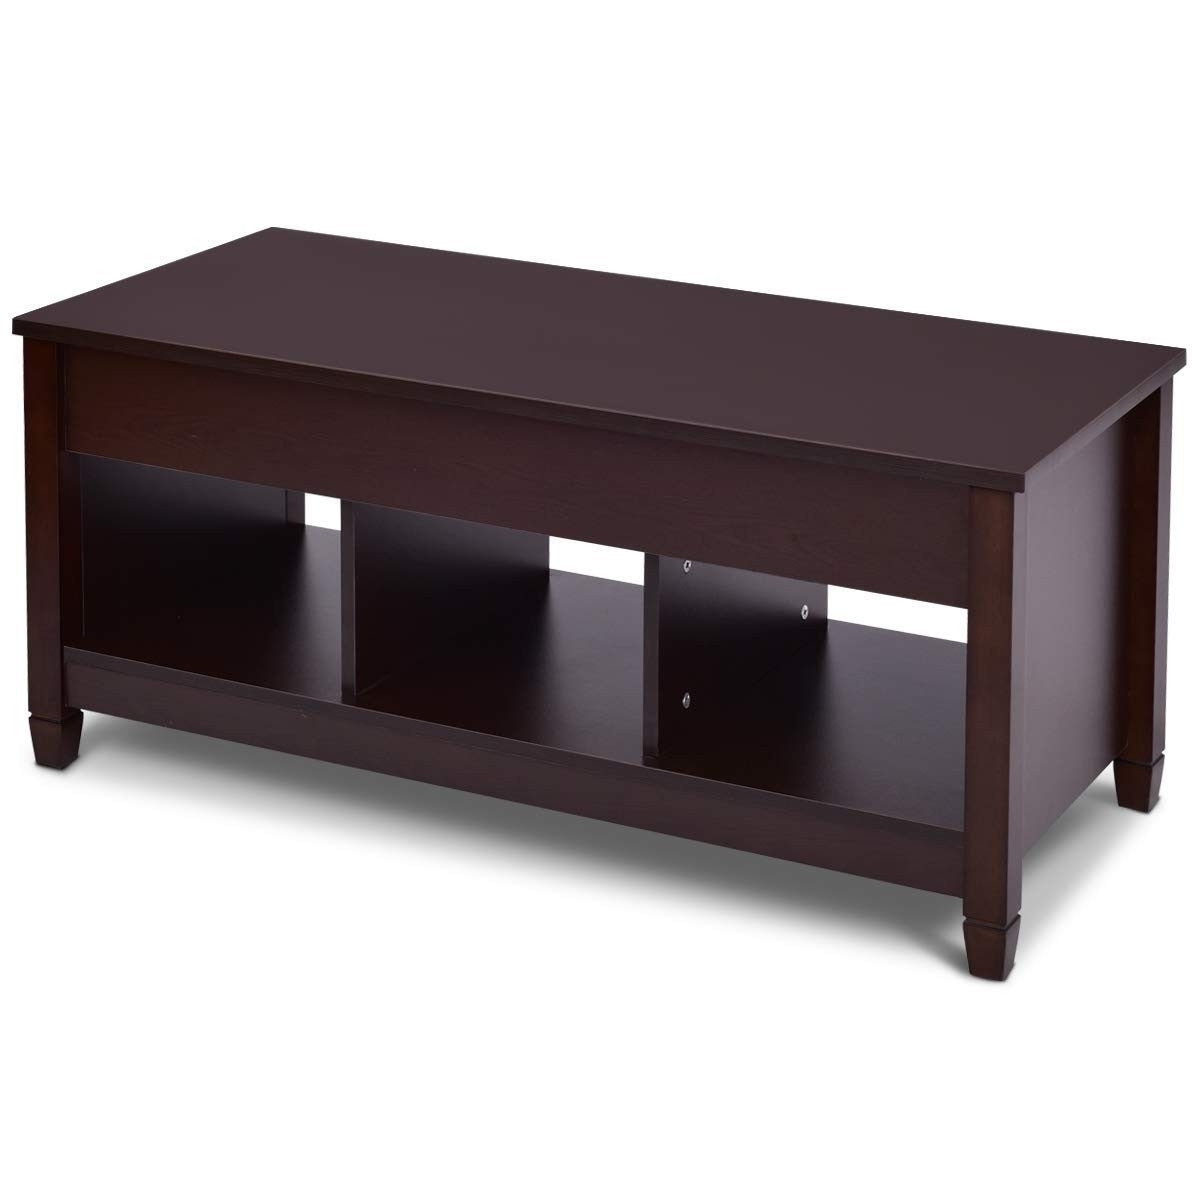 Brown Wood Lift Top Coffee Table with Hidden Storage Space